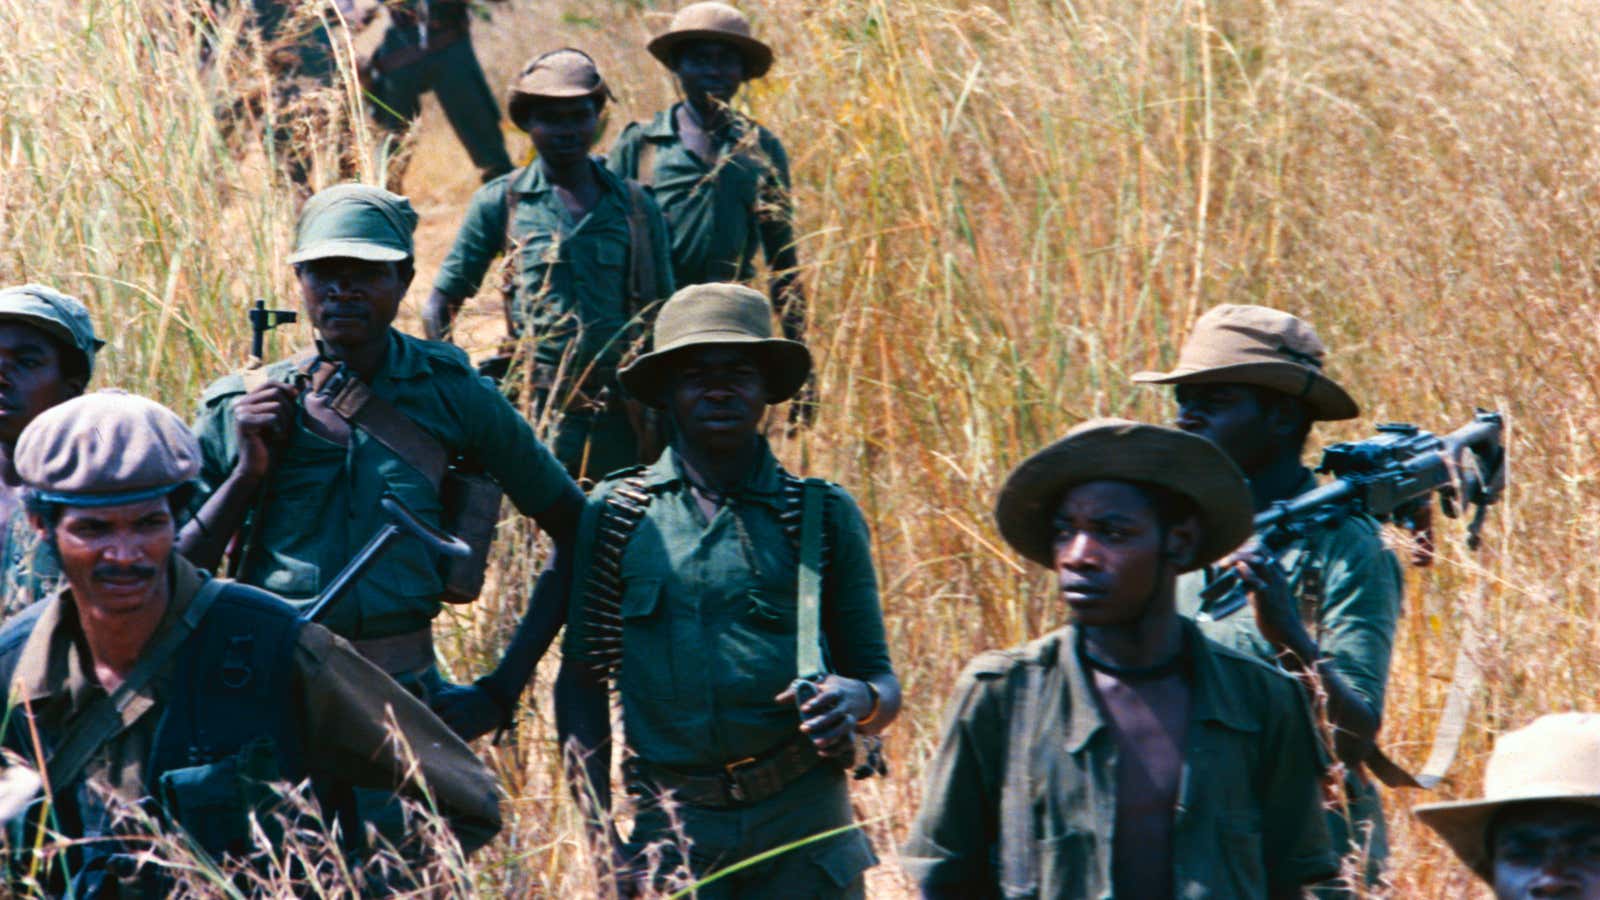 Troops during the Angolan civil war.